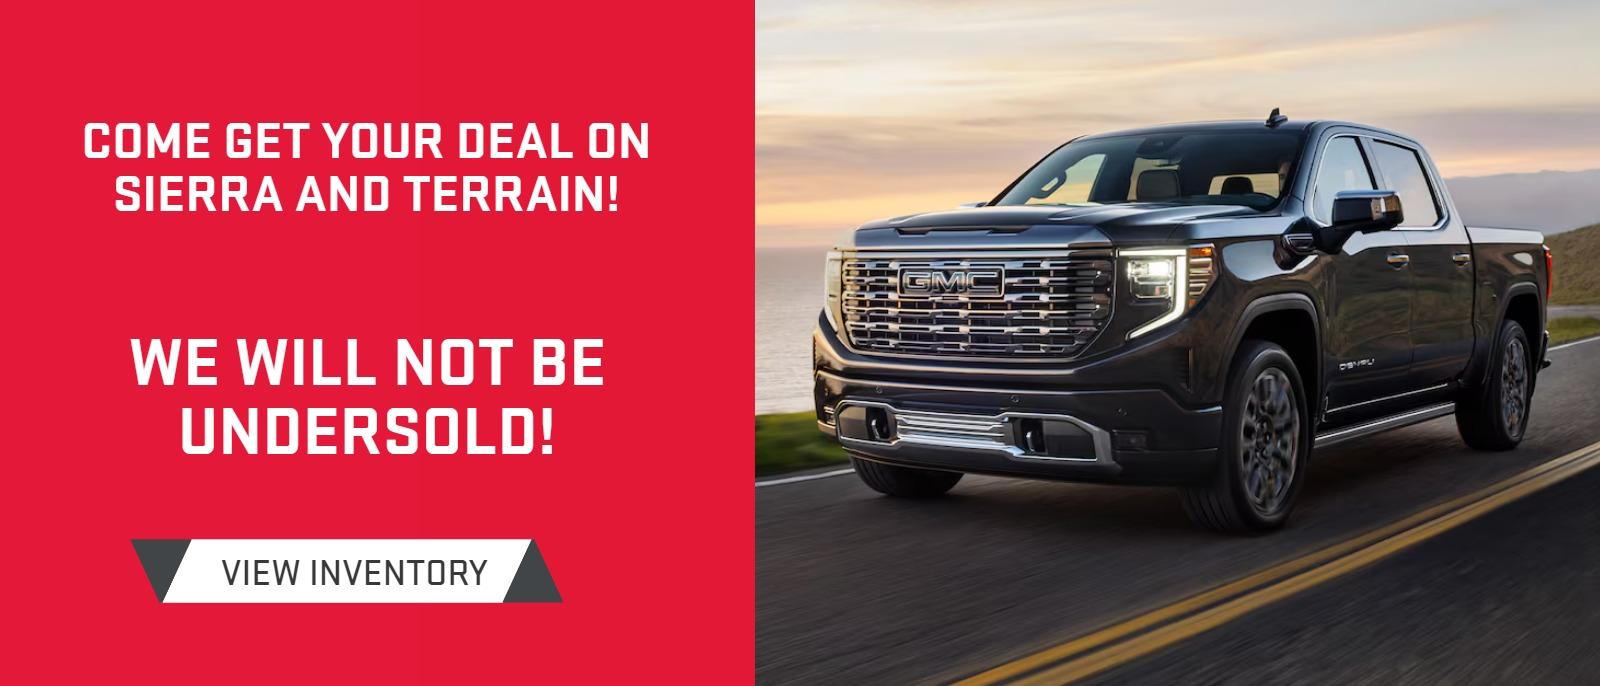 Come get your deal on Sierra and Terrain! We will not be undersold!